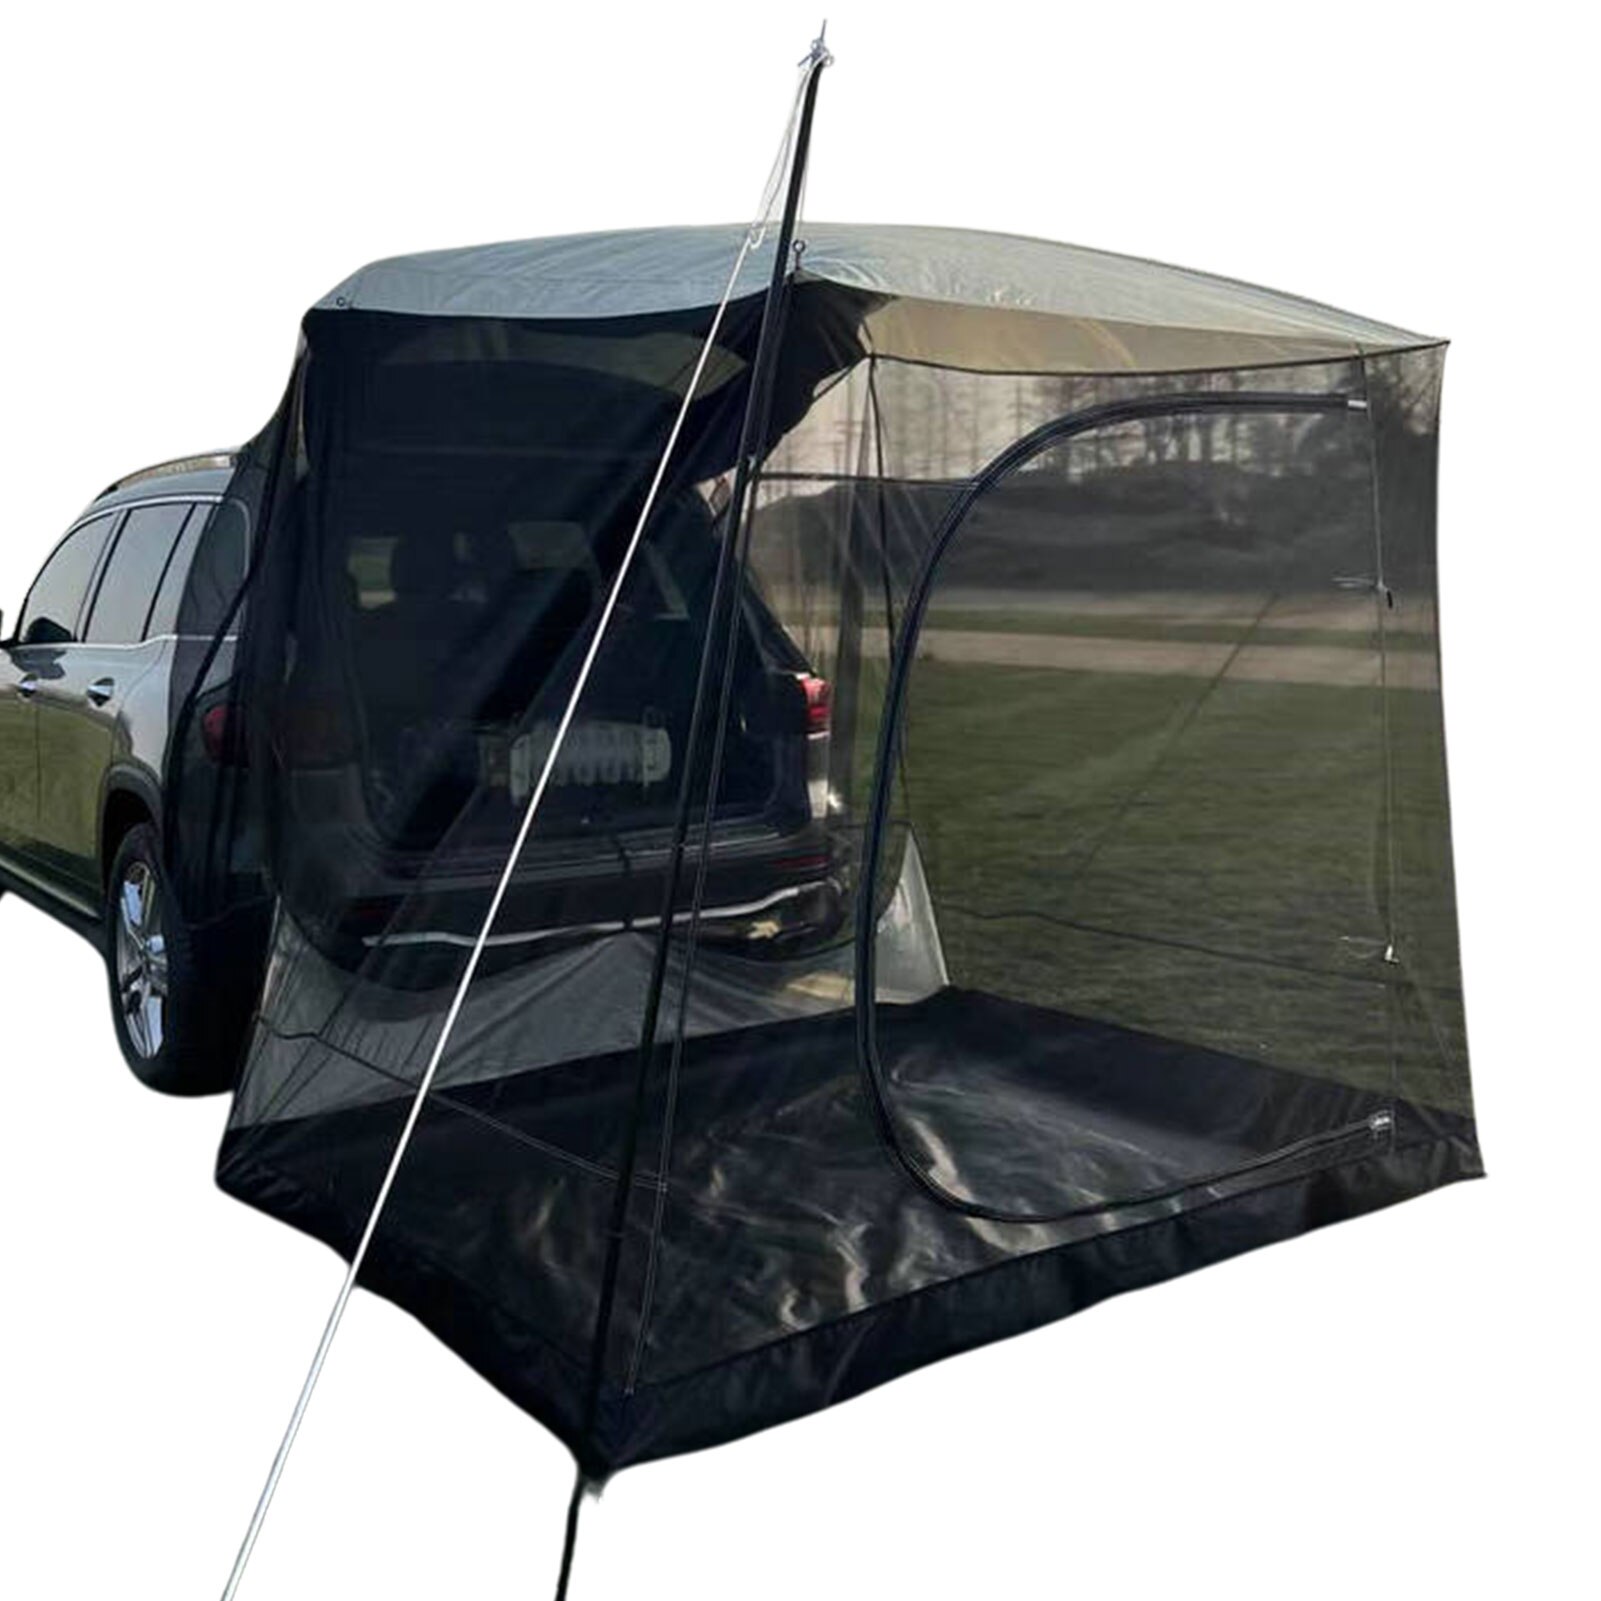 Cheap Goat Tents Portable Car Awning Sun Shelter Outdoor Car Canopy Sun Shade Canopy Tent For Cars Trucks Car Rear Tent Awning Camping Tents